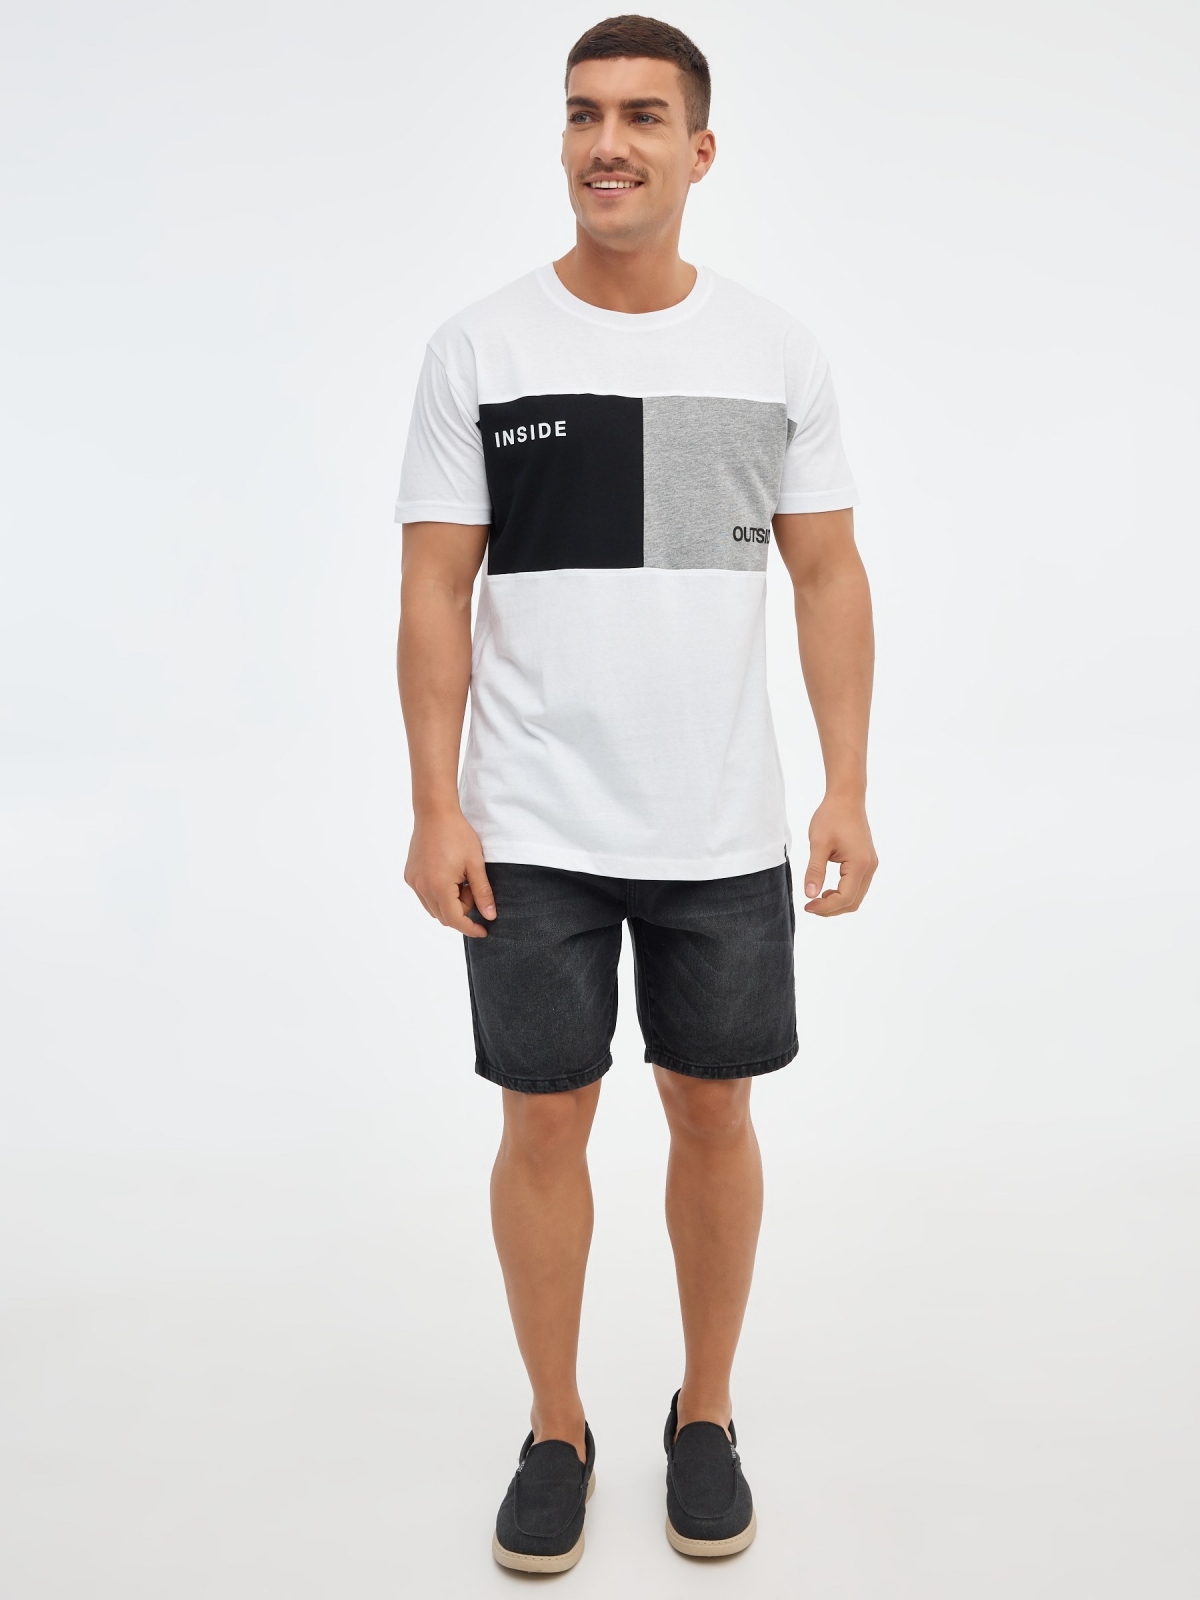 Outside color block t-shirt white front view